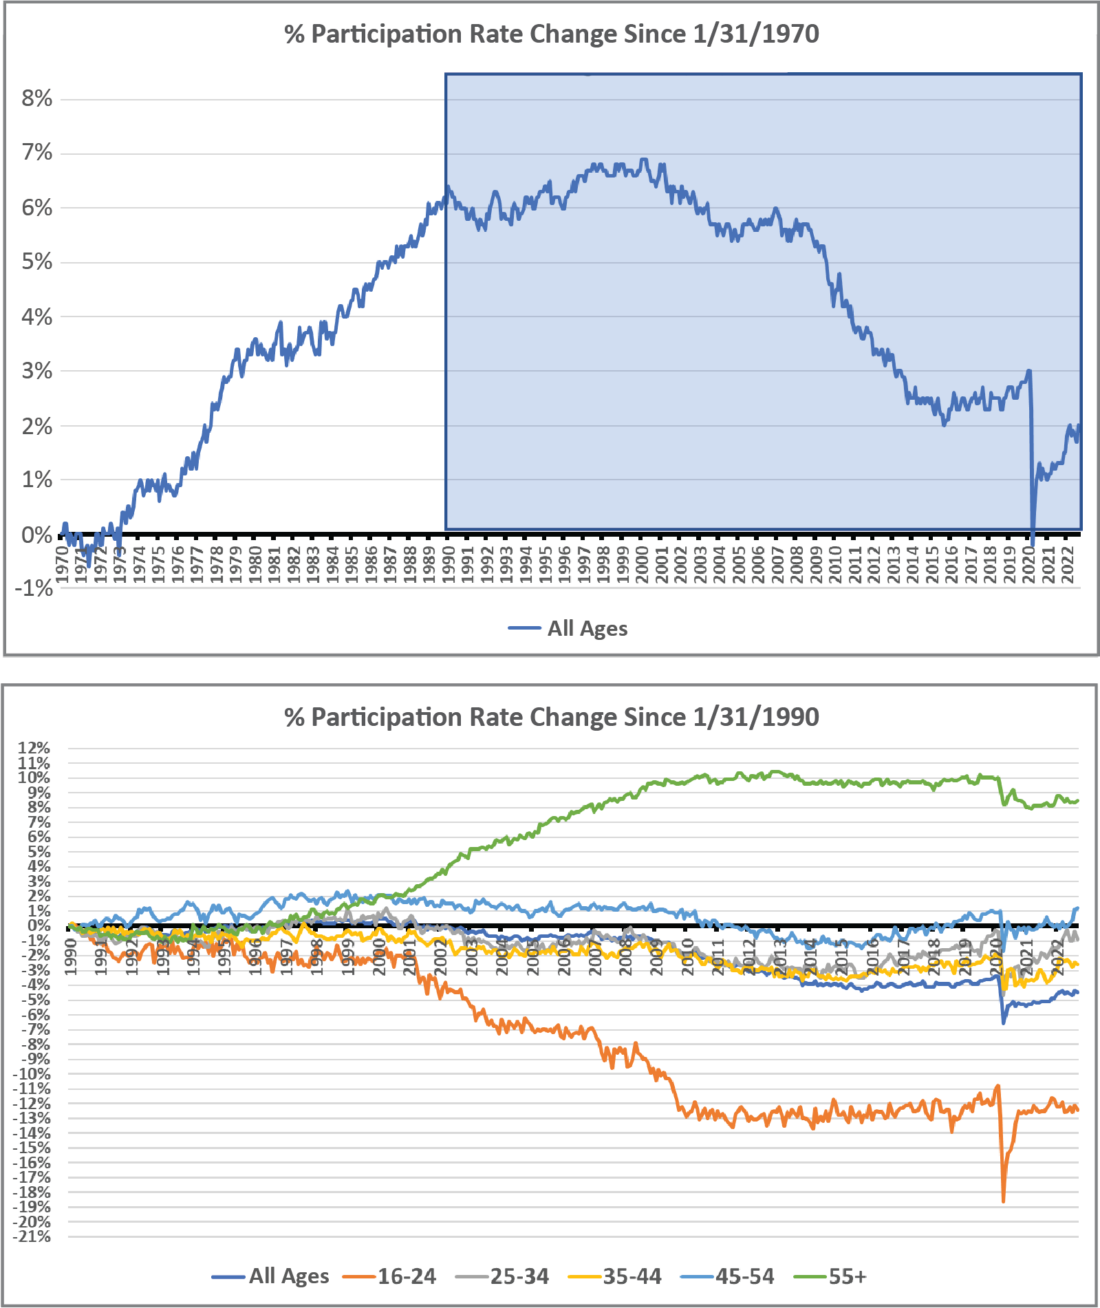 Figure 3: Labor force participation rates (normalized to show change since January 1970 in the top chart and change since January 1990 in the bottom chart) show long-term secular trends which began well before the current economic cycle.